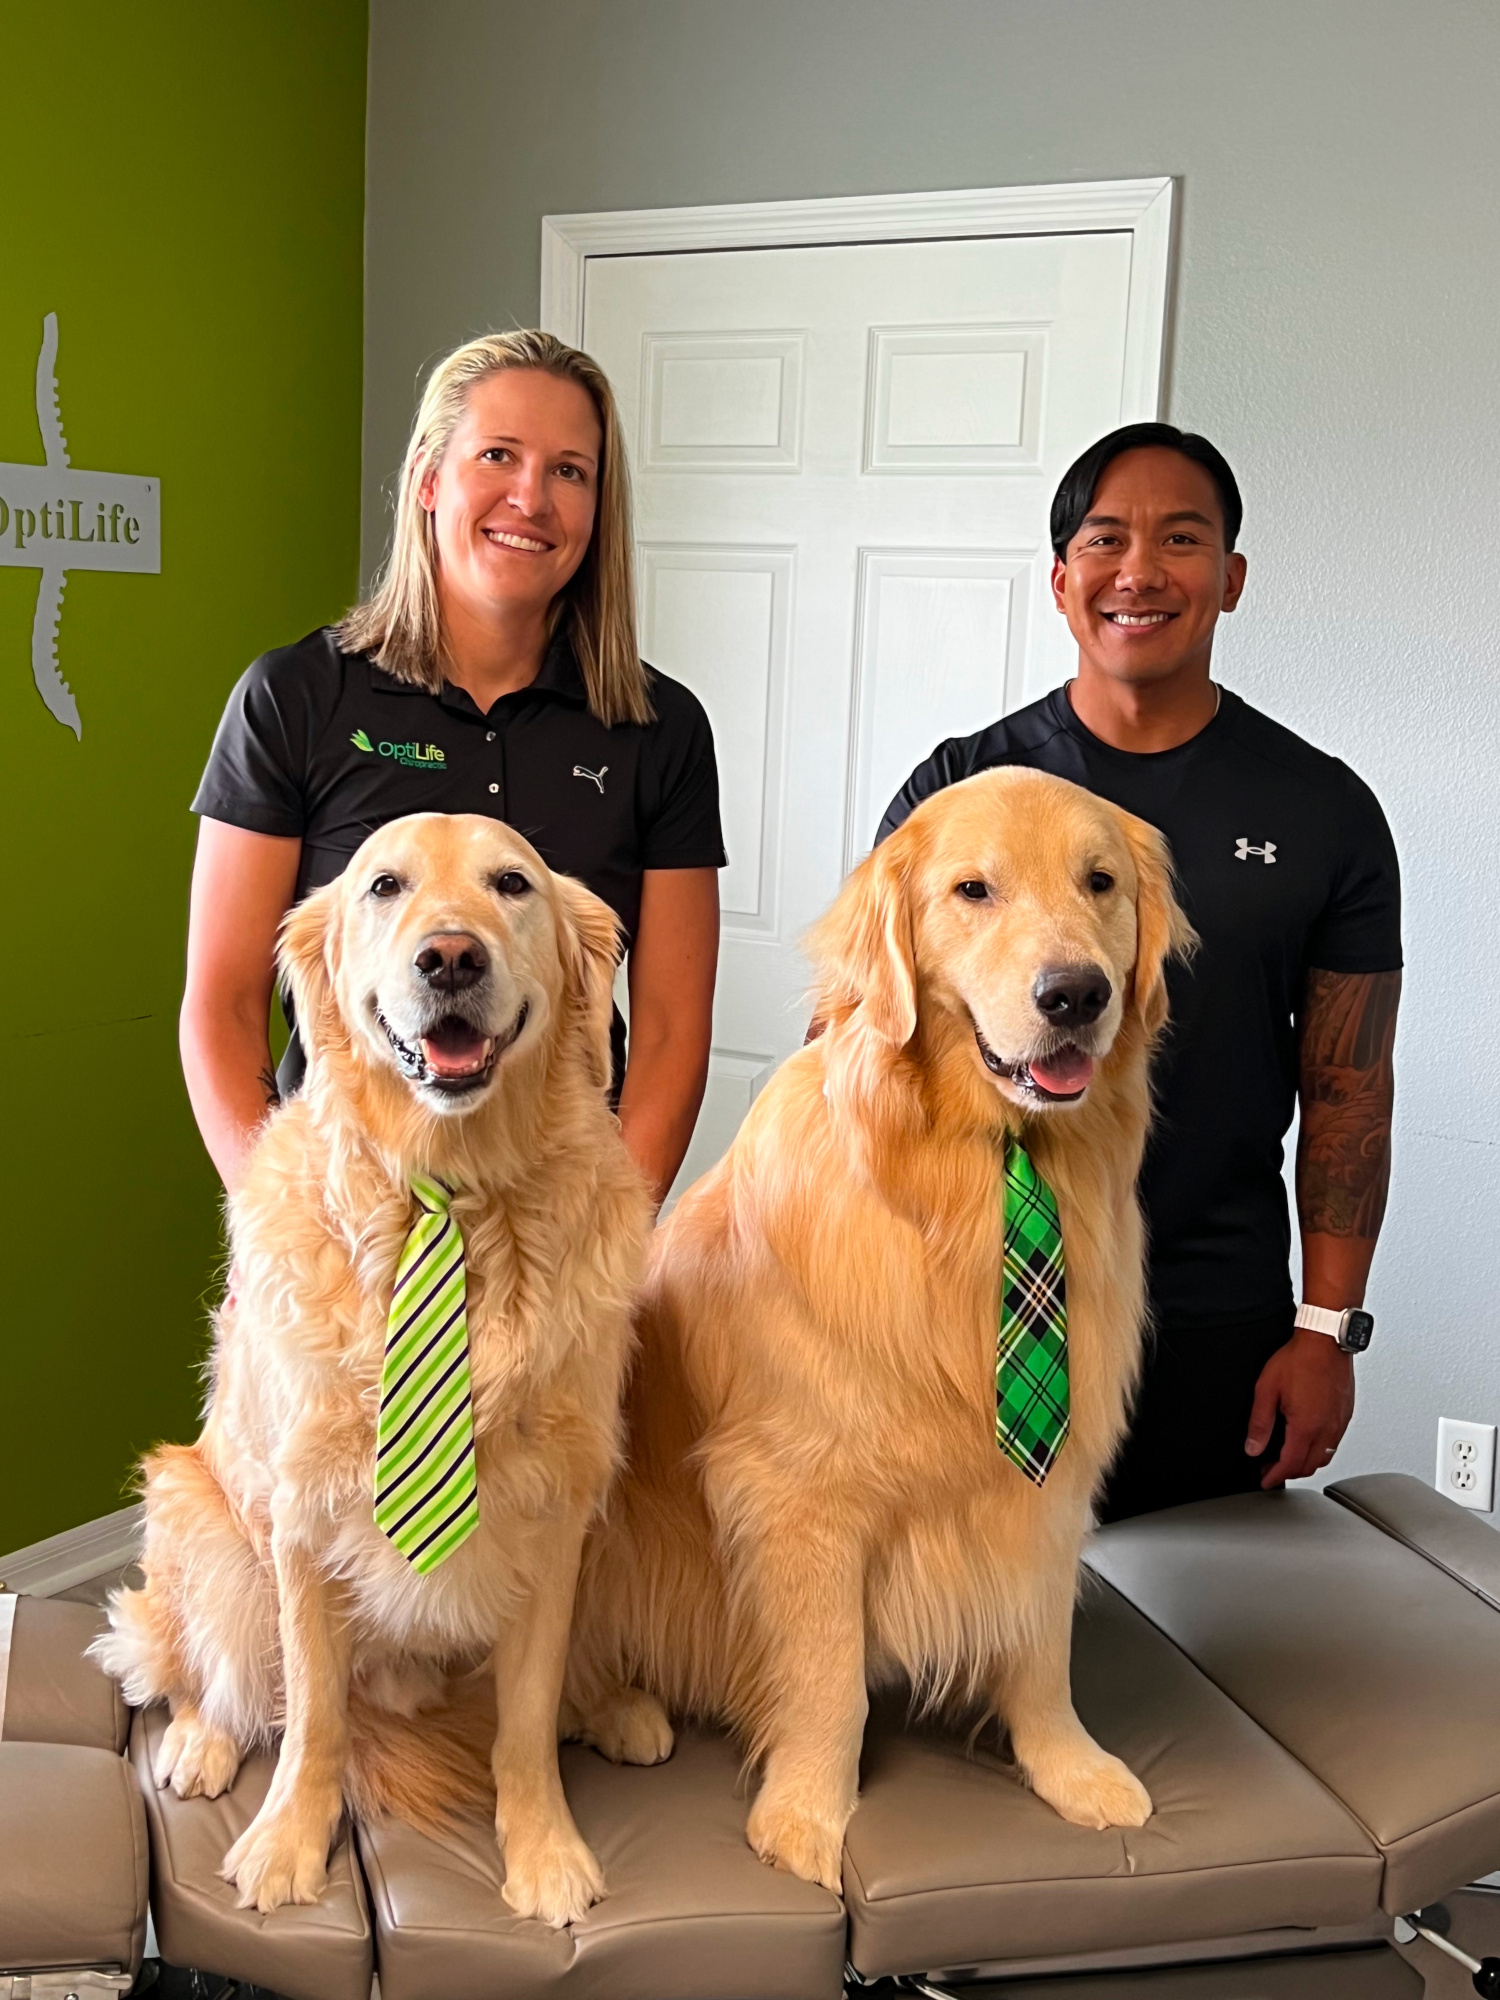 Dr. Danielle Hoeffner and Dr. Allen Molina - Optilife Chiropractors with service dogs